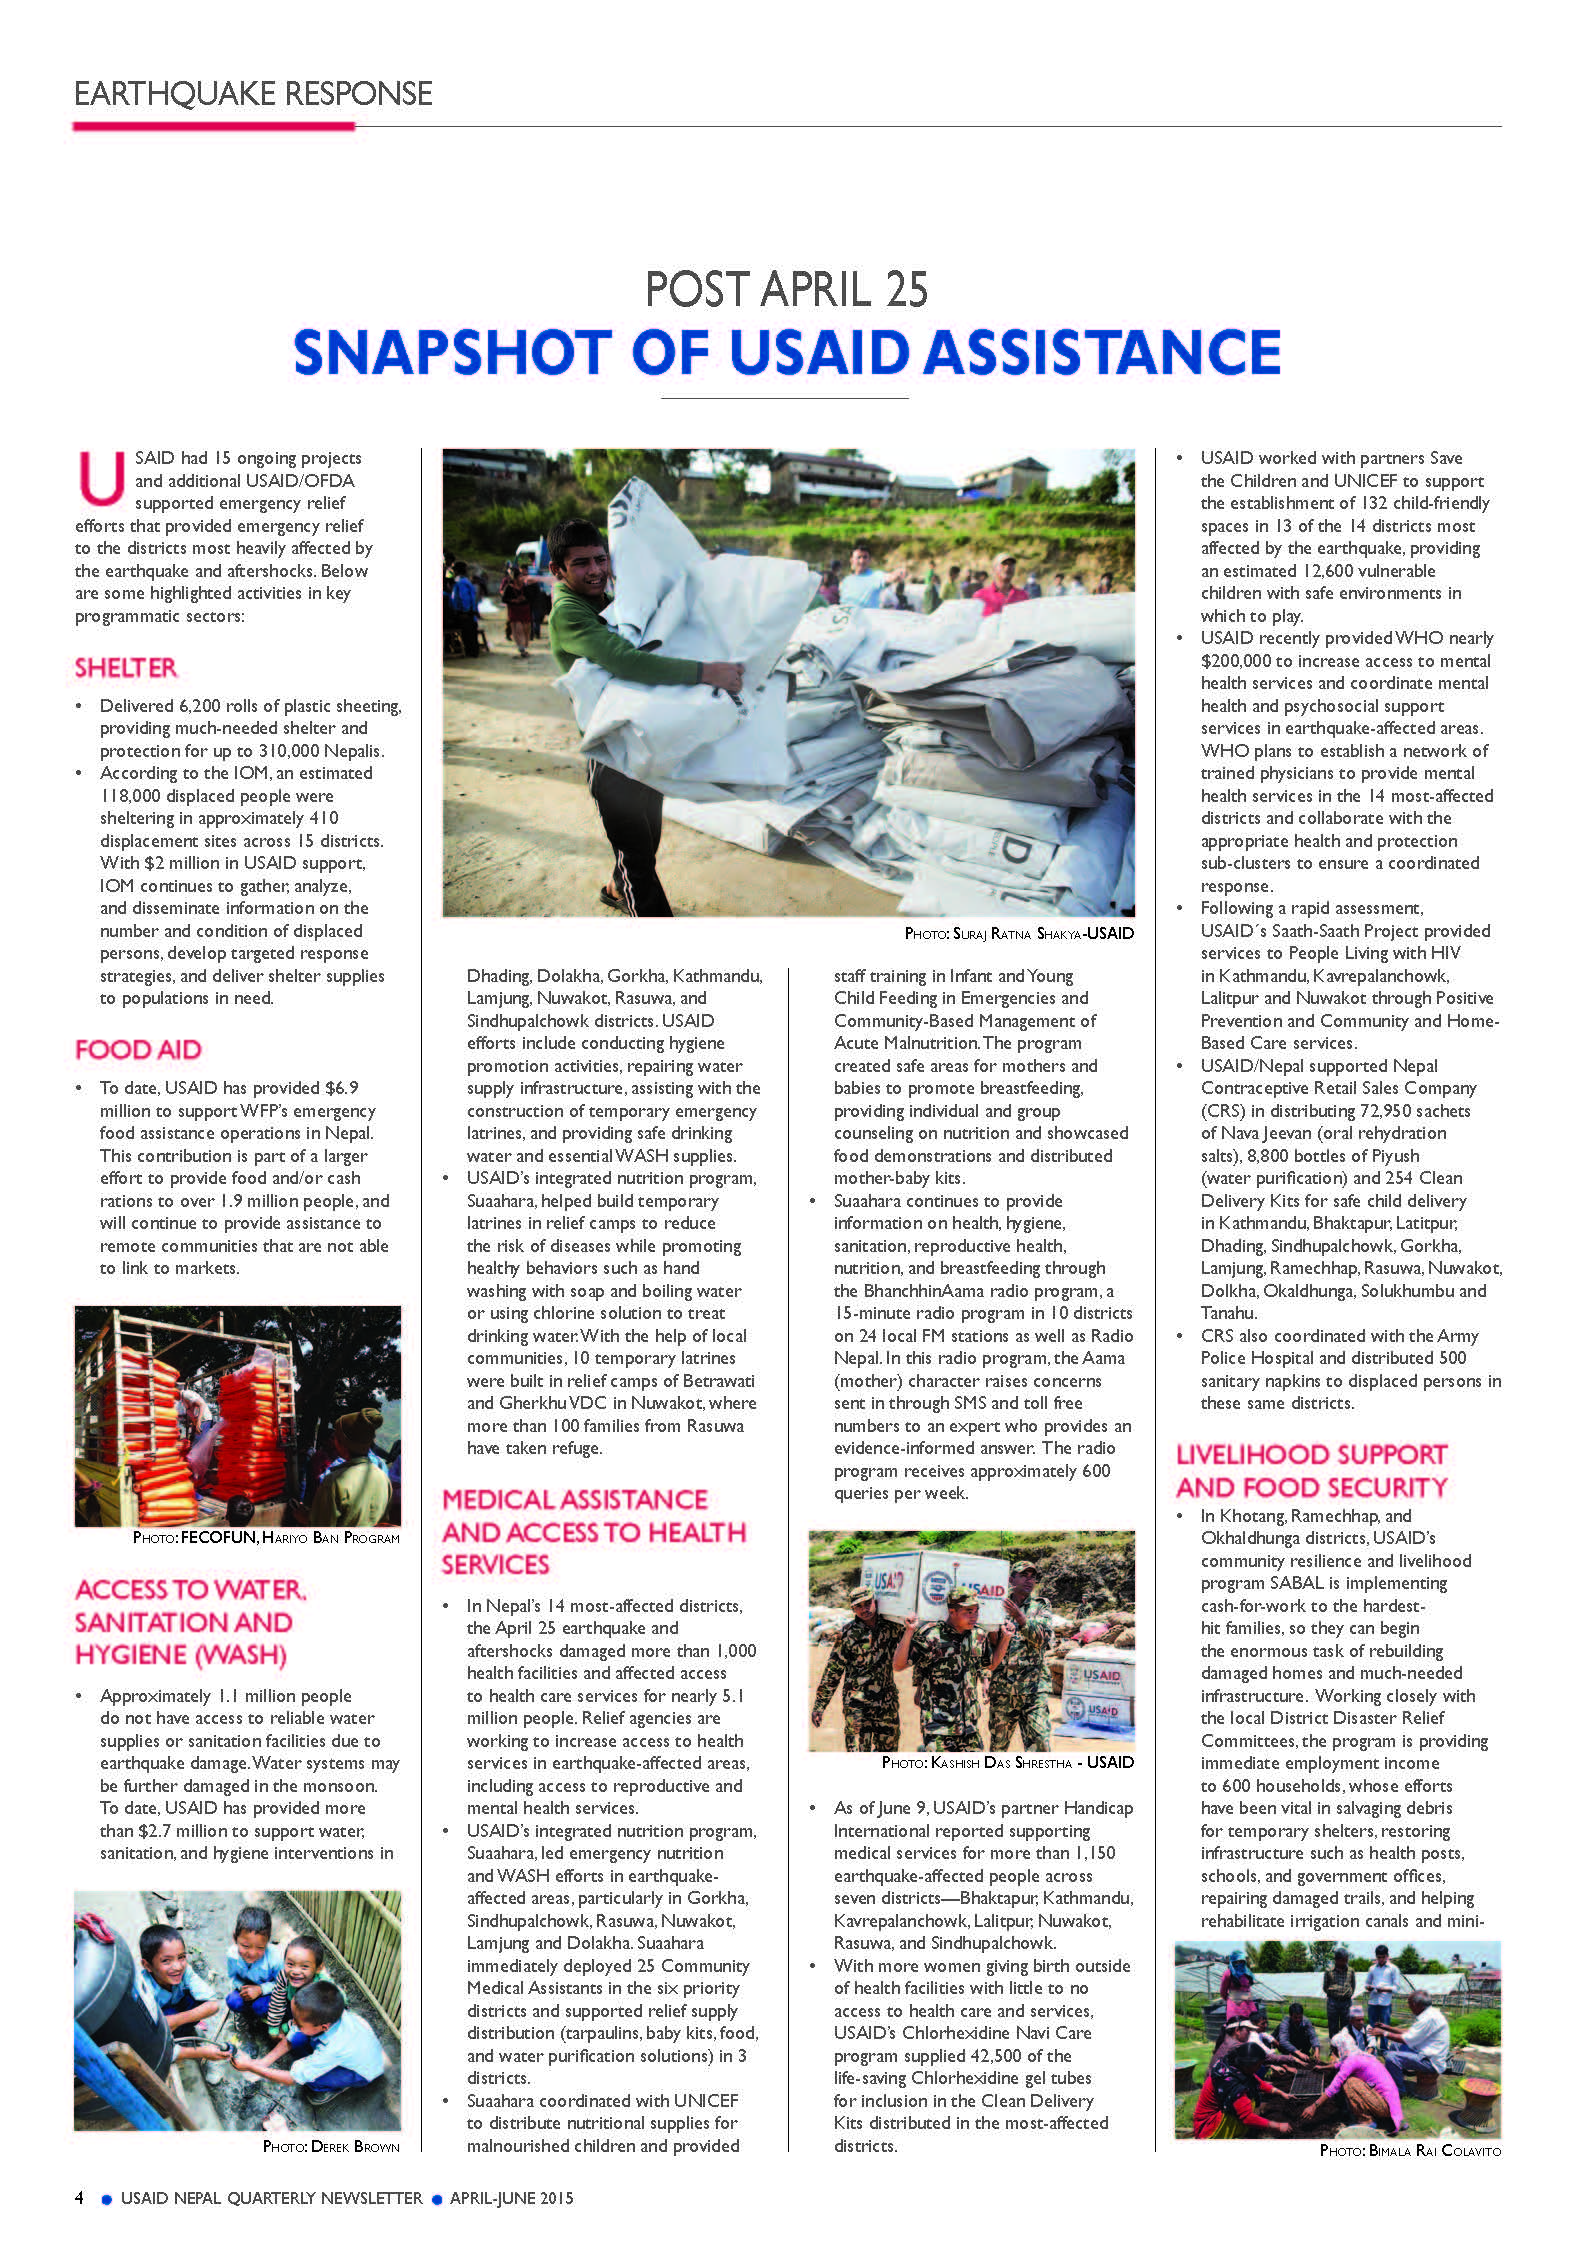 POST APRIL 25: SNAPSHOT OF USAID ASSISTANCE